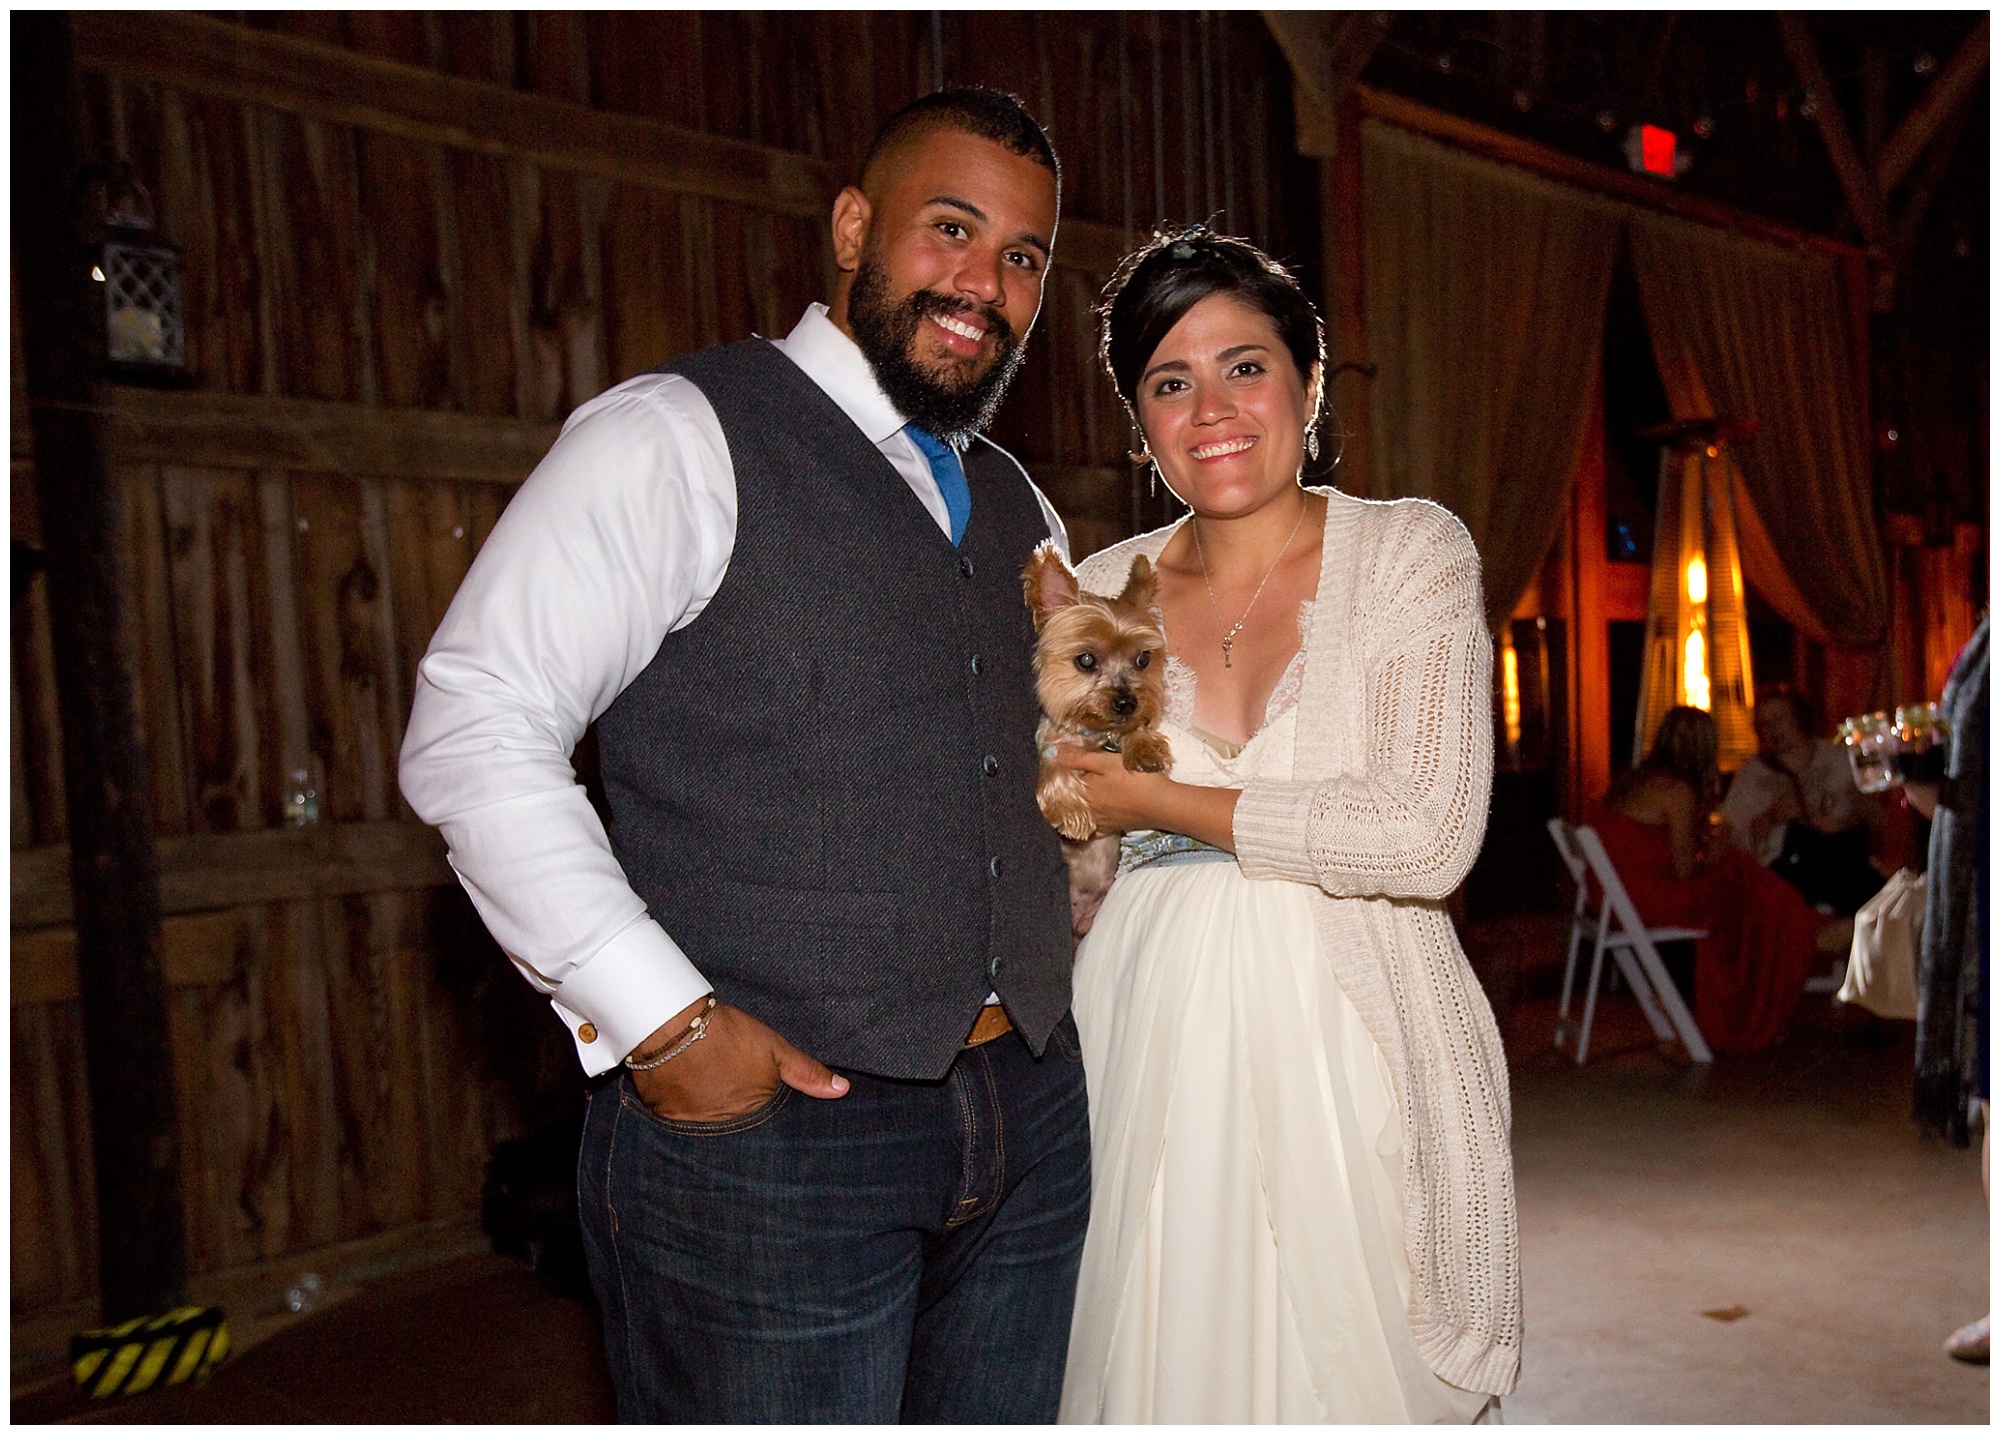 Photo of the bride, groom and thier dog.